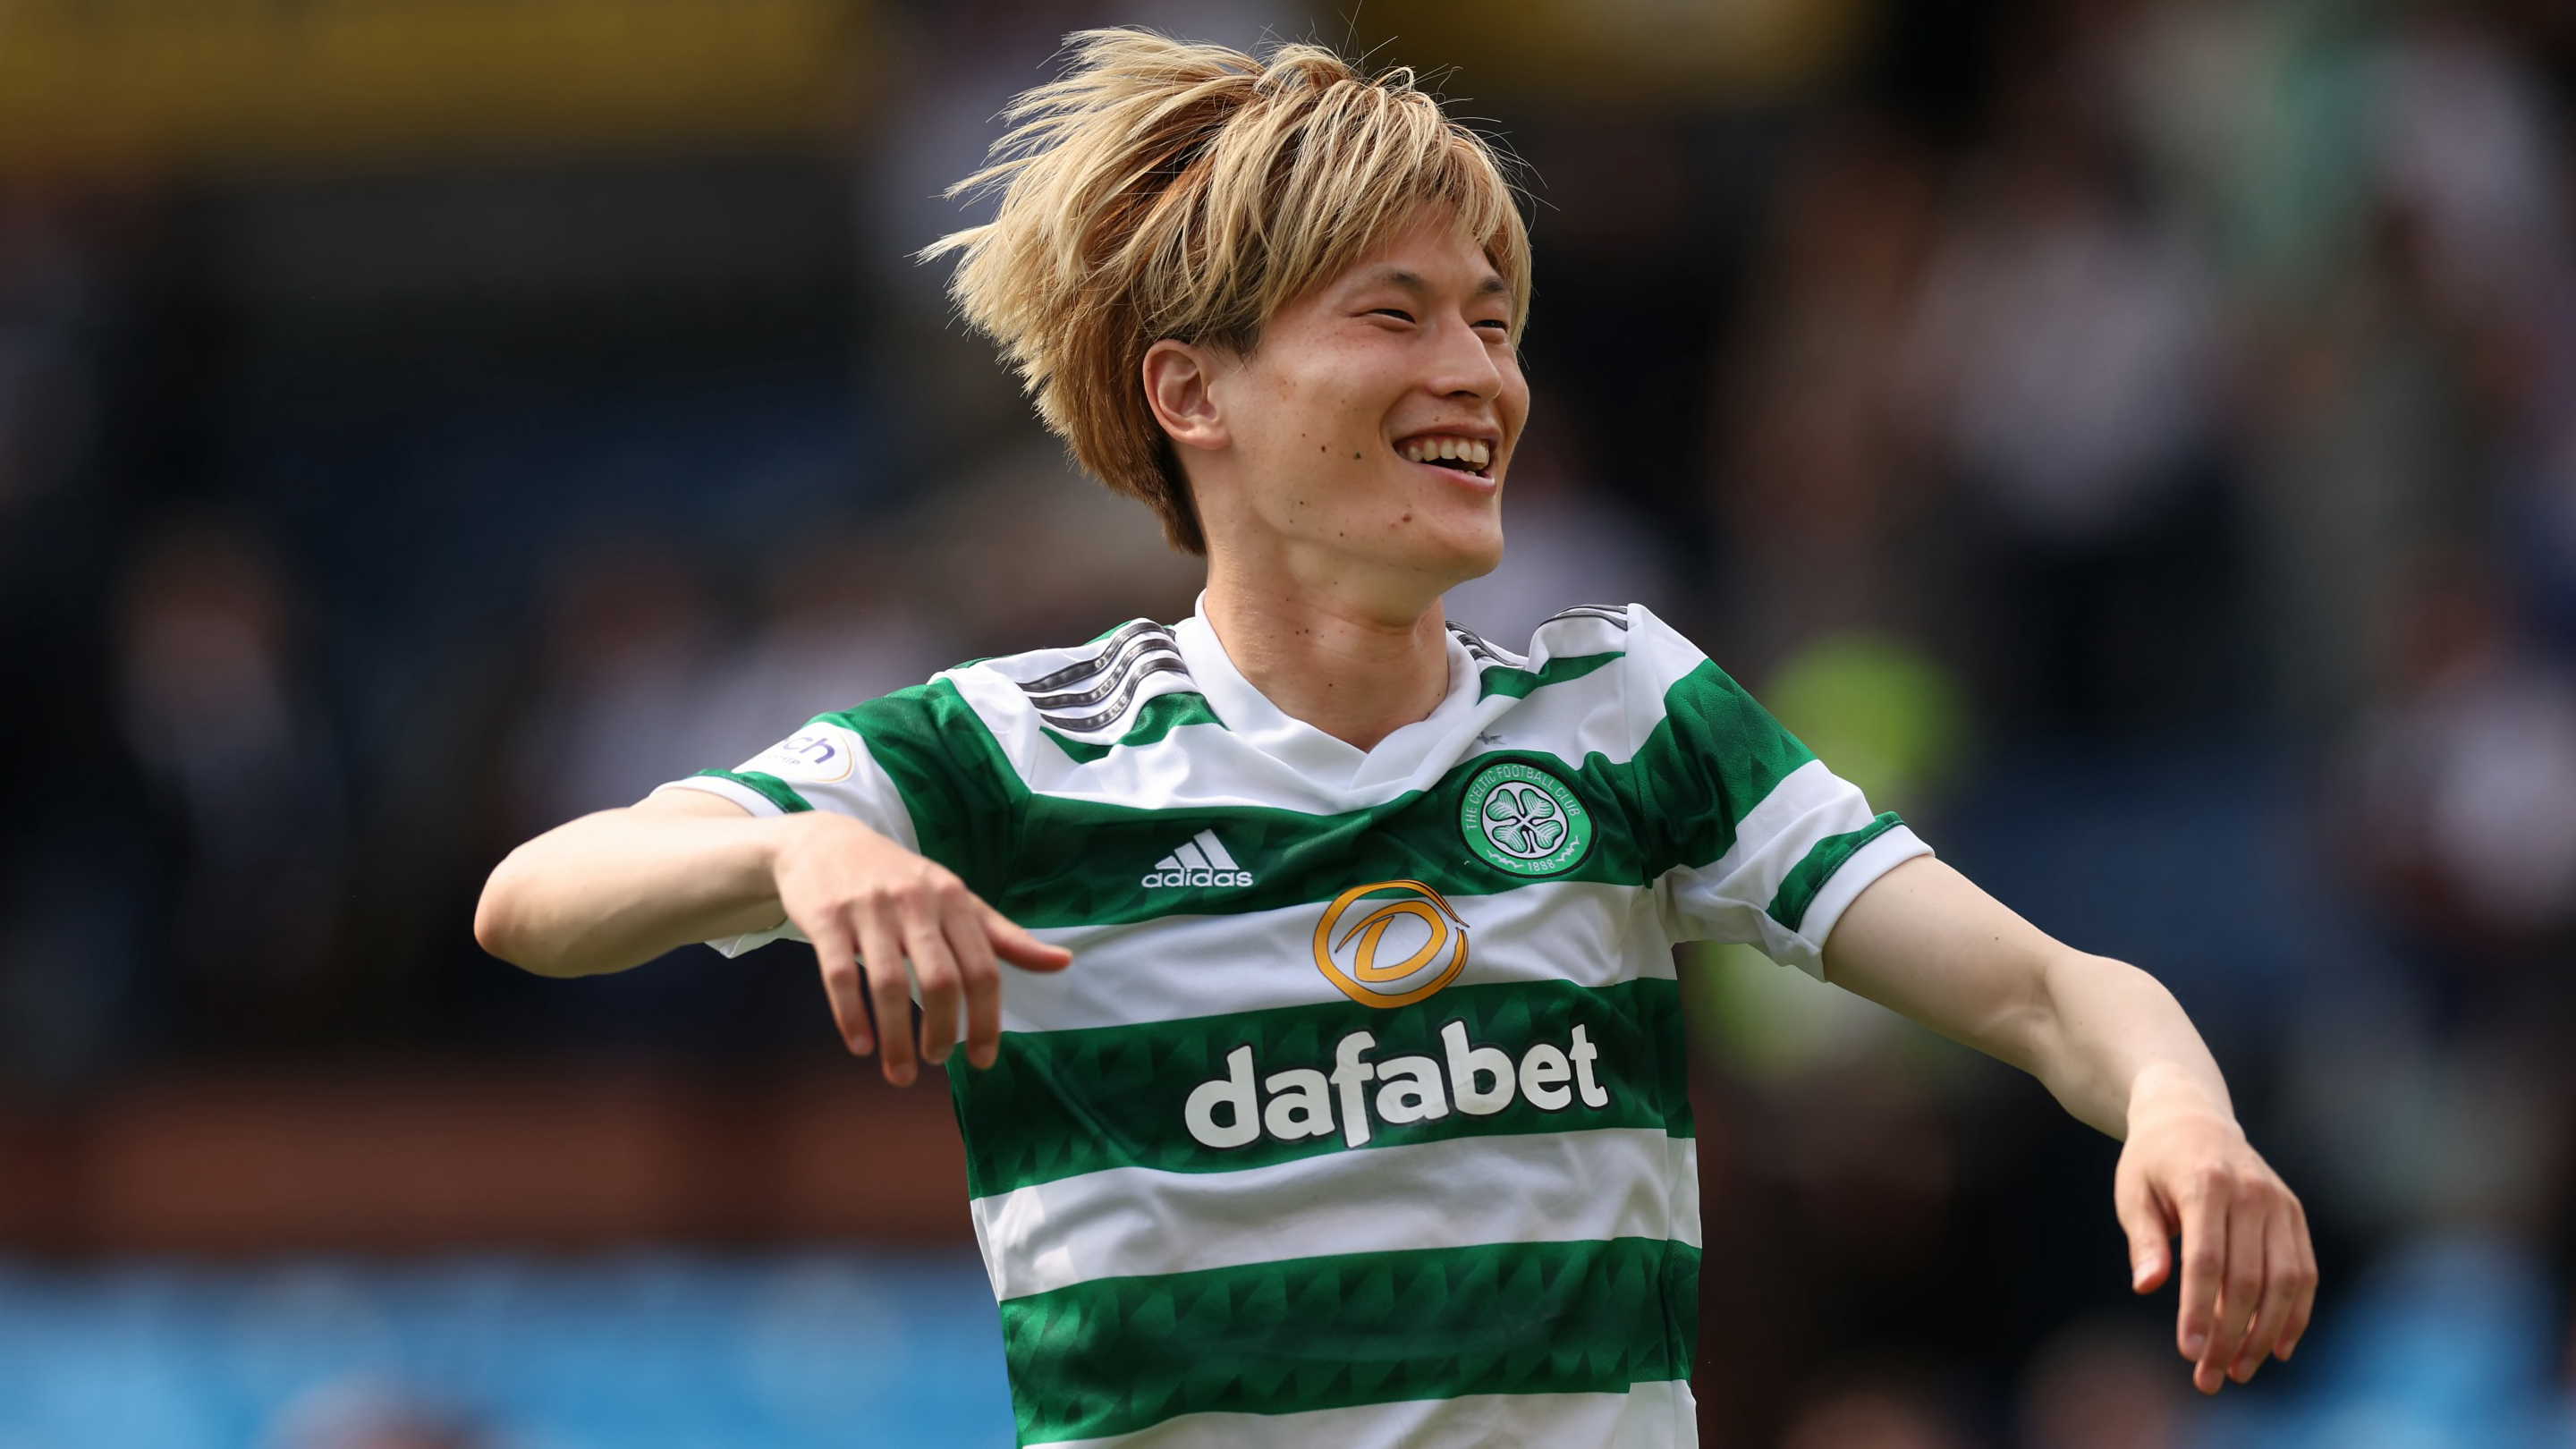 Dundee United 0-9 Celtic: Kyogo and Abada net hat-tricks as Hoops break away record